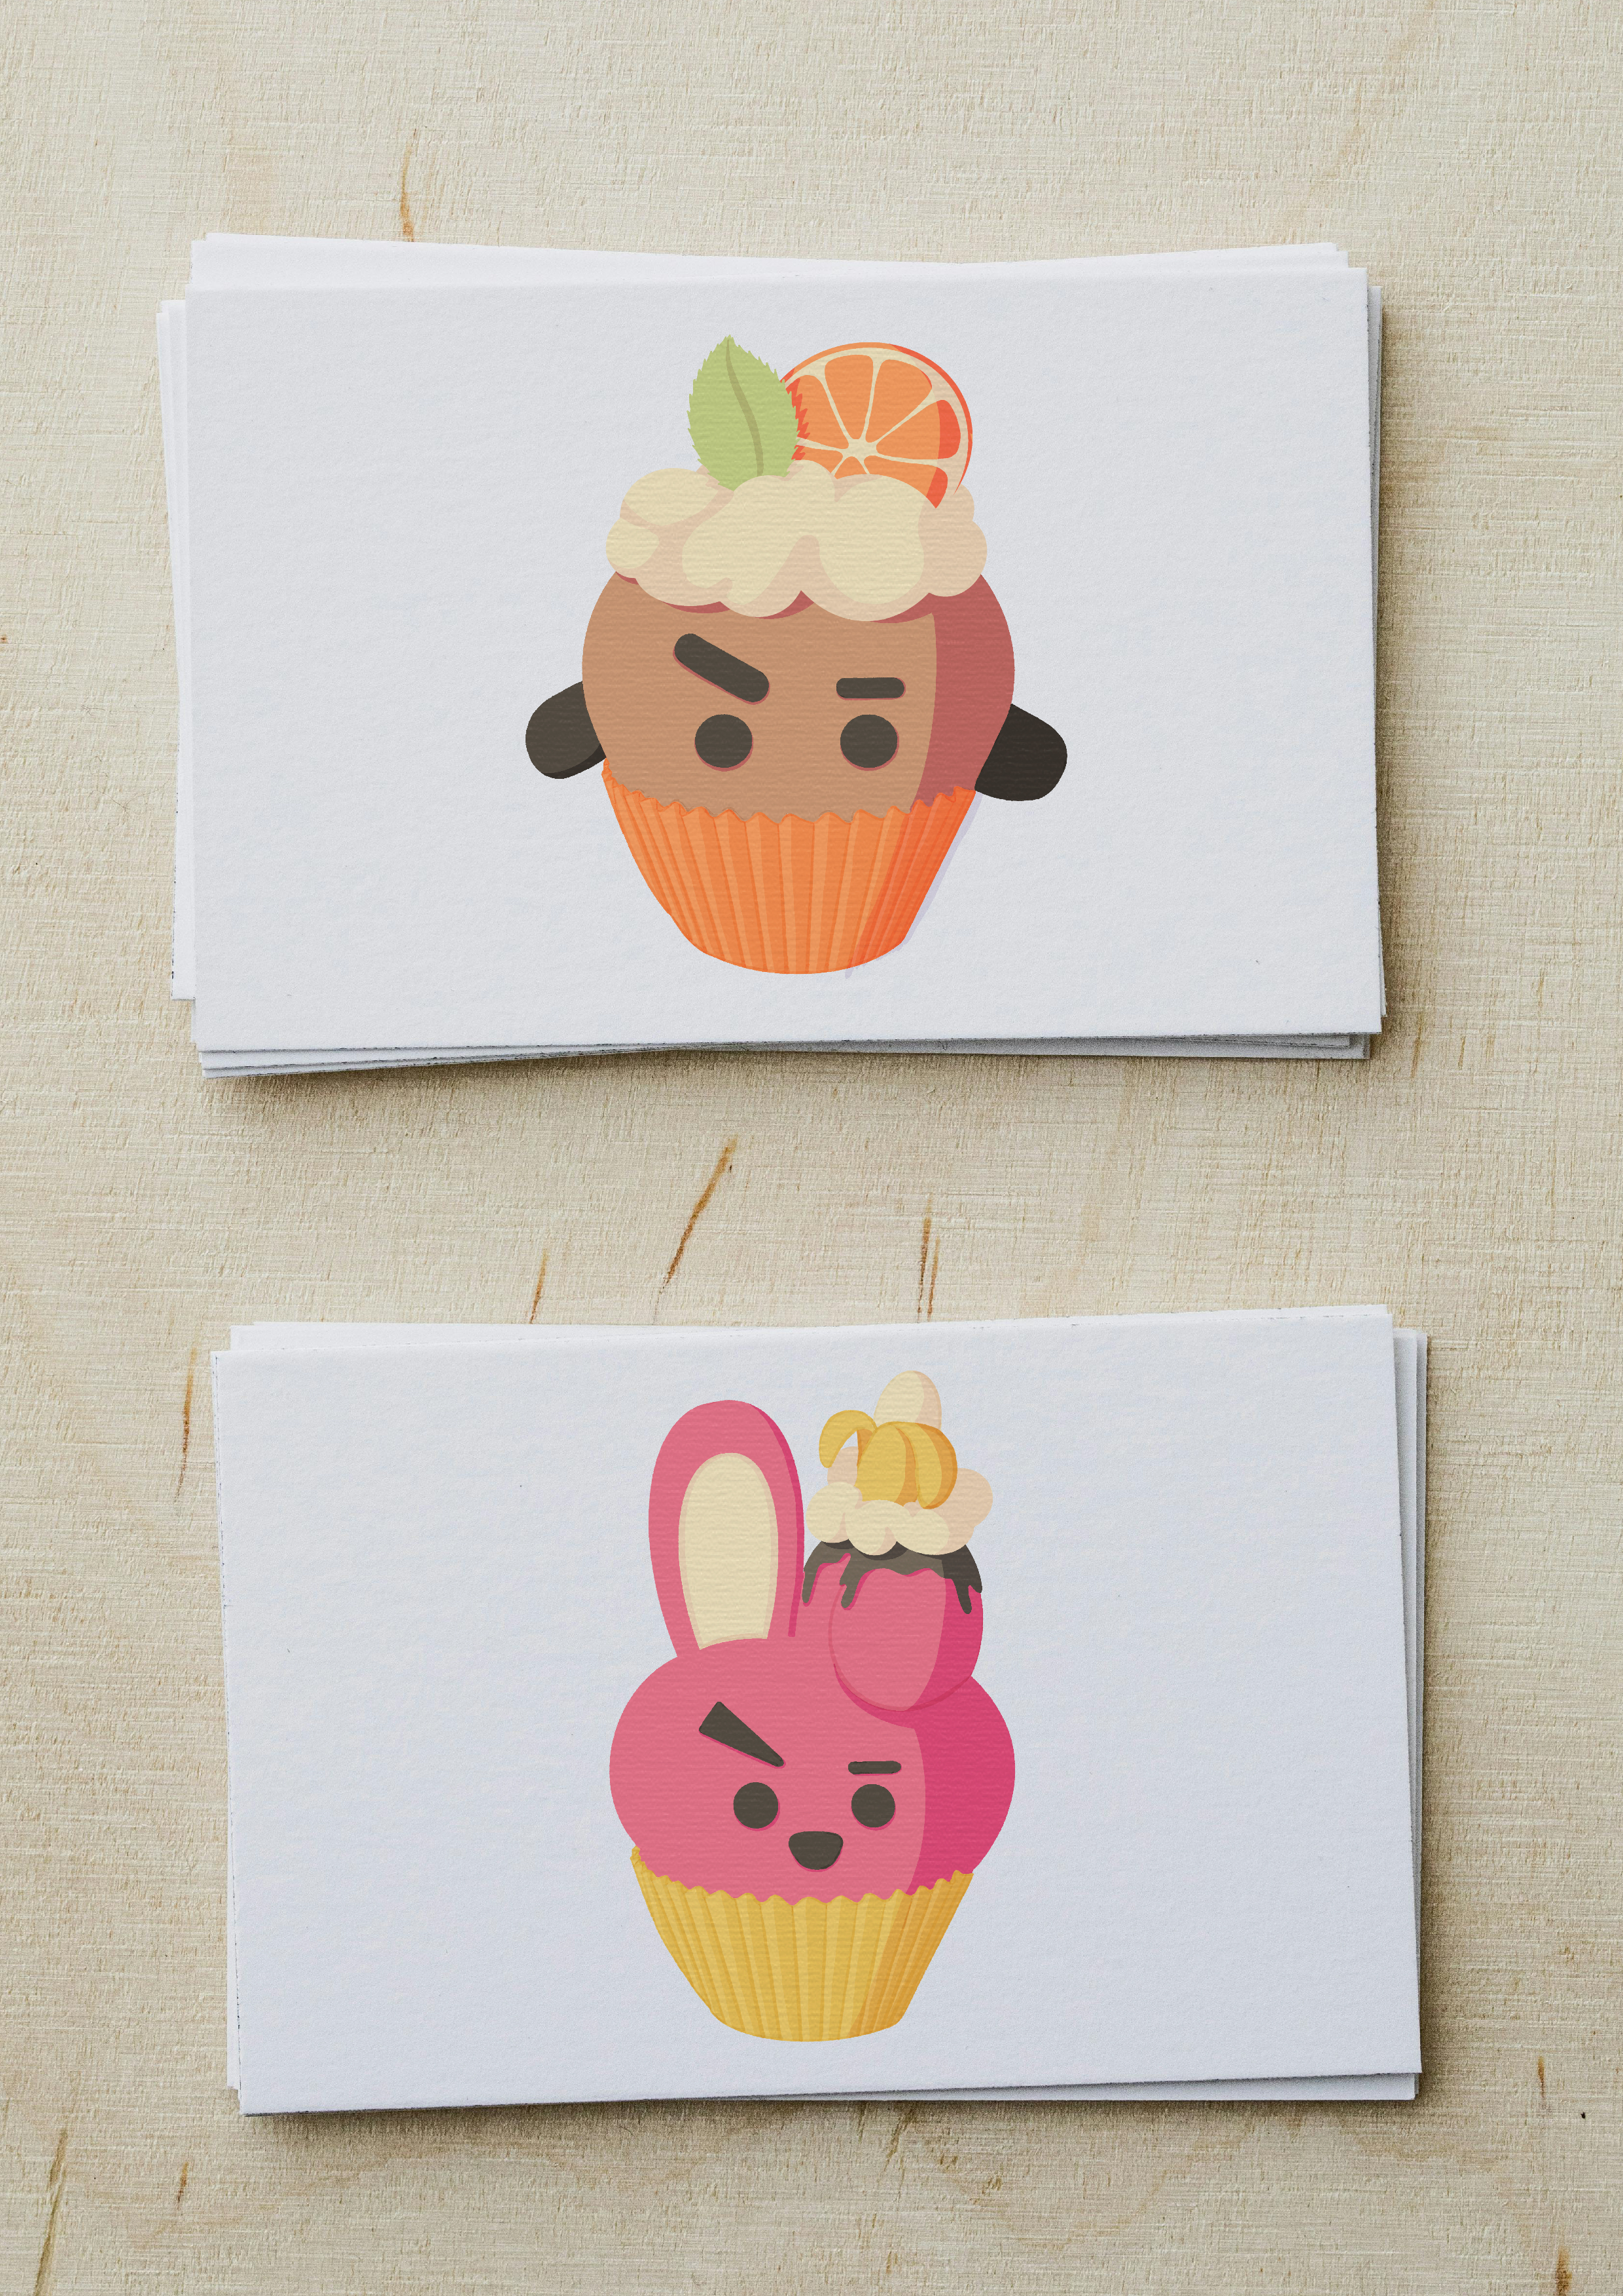 ashole world sticker designs, shooky cupcake and cooky cupcake